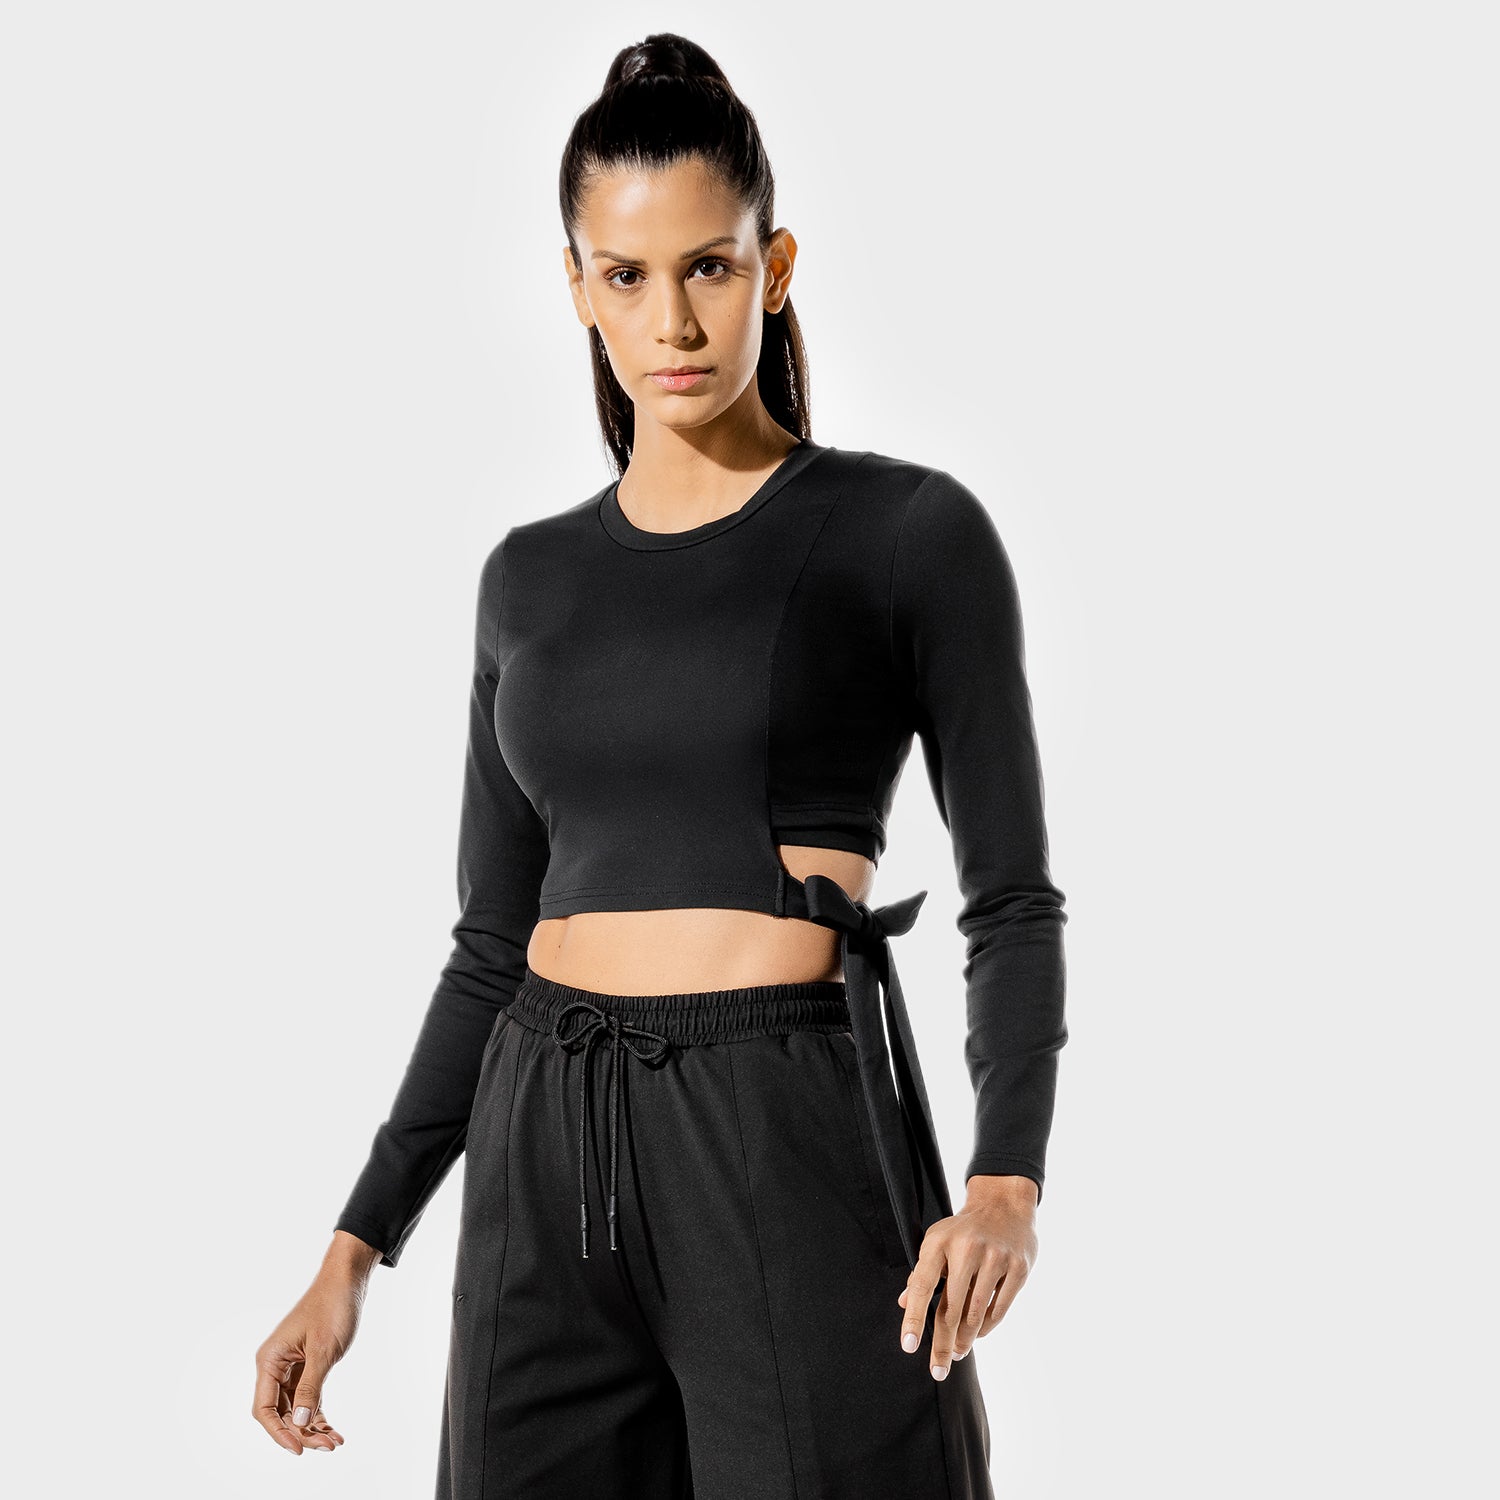 squatwolf-workout-clothes-womens-fitness-tie-crop-black-gym-t-shirts